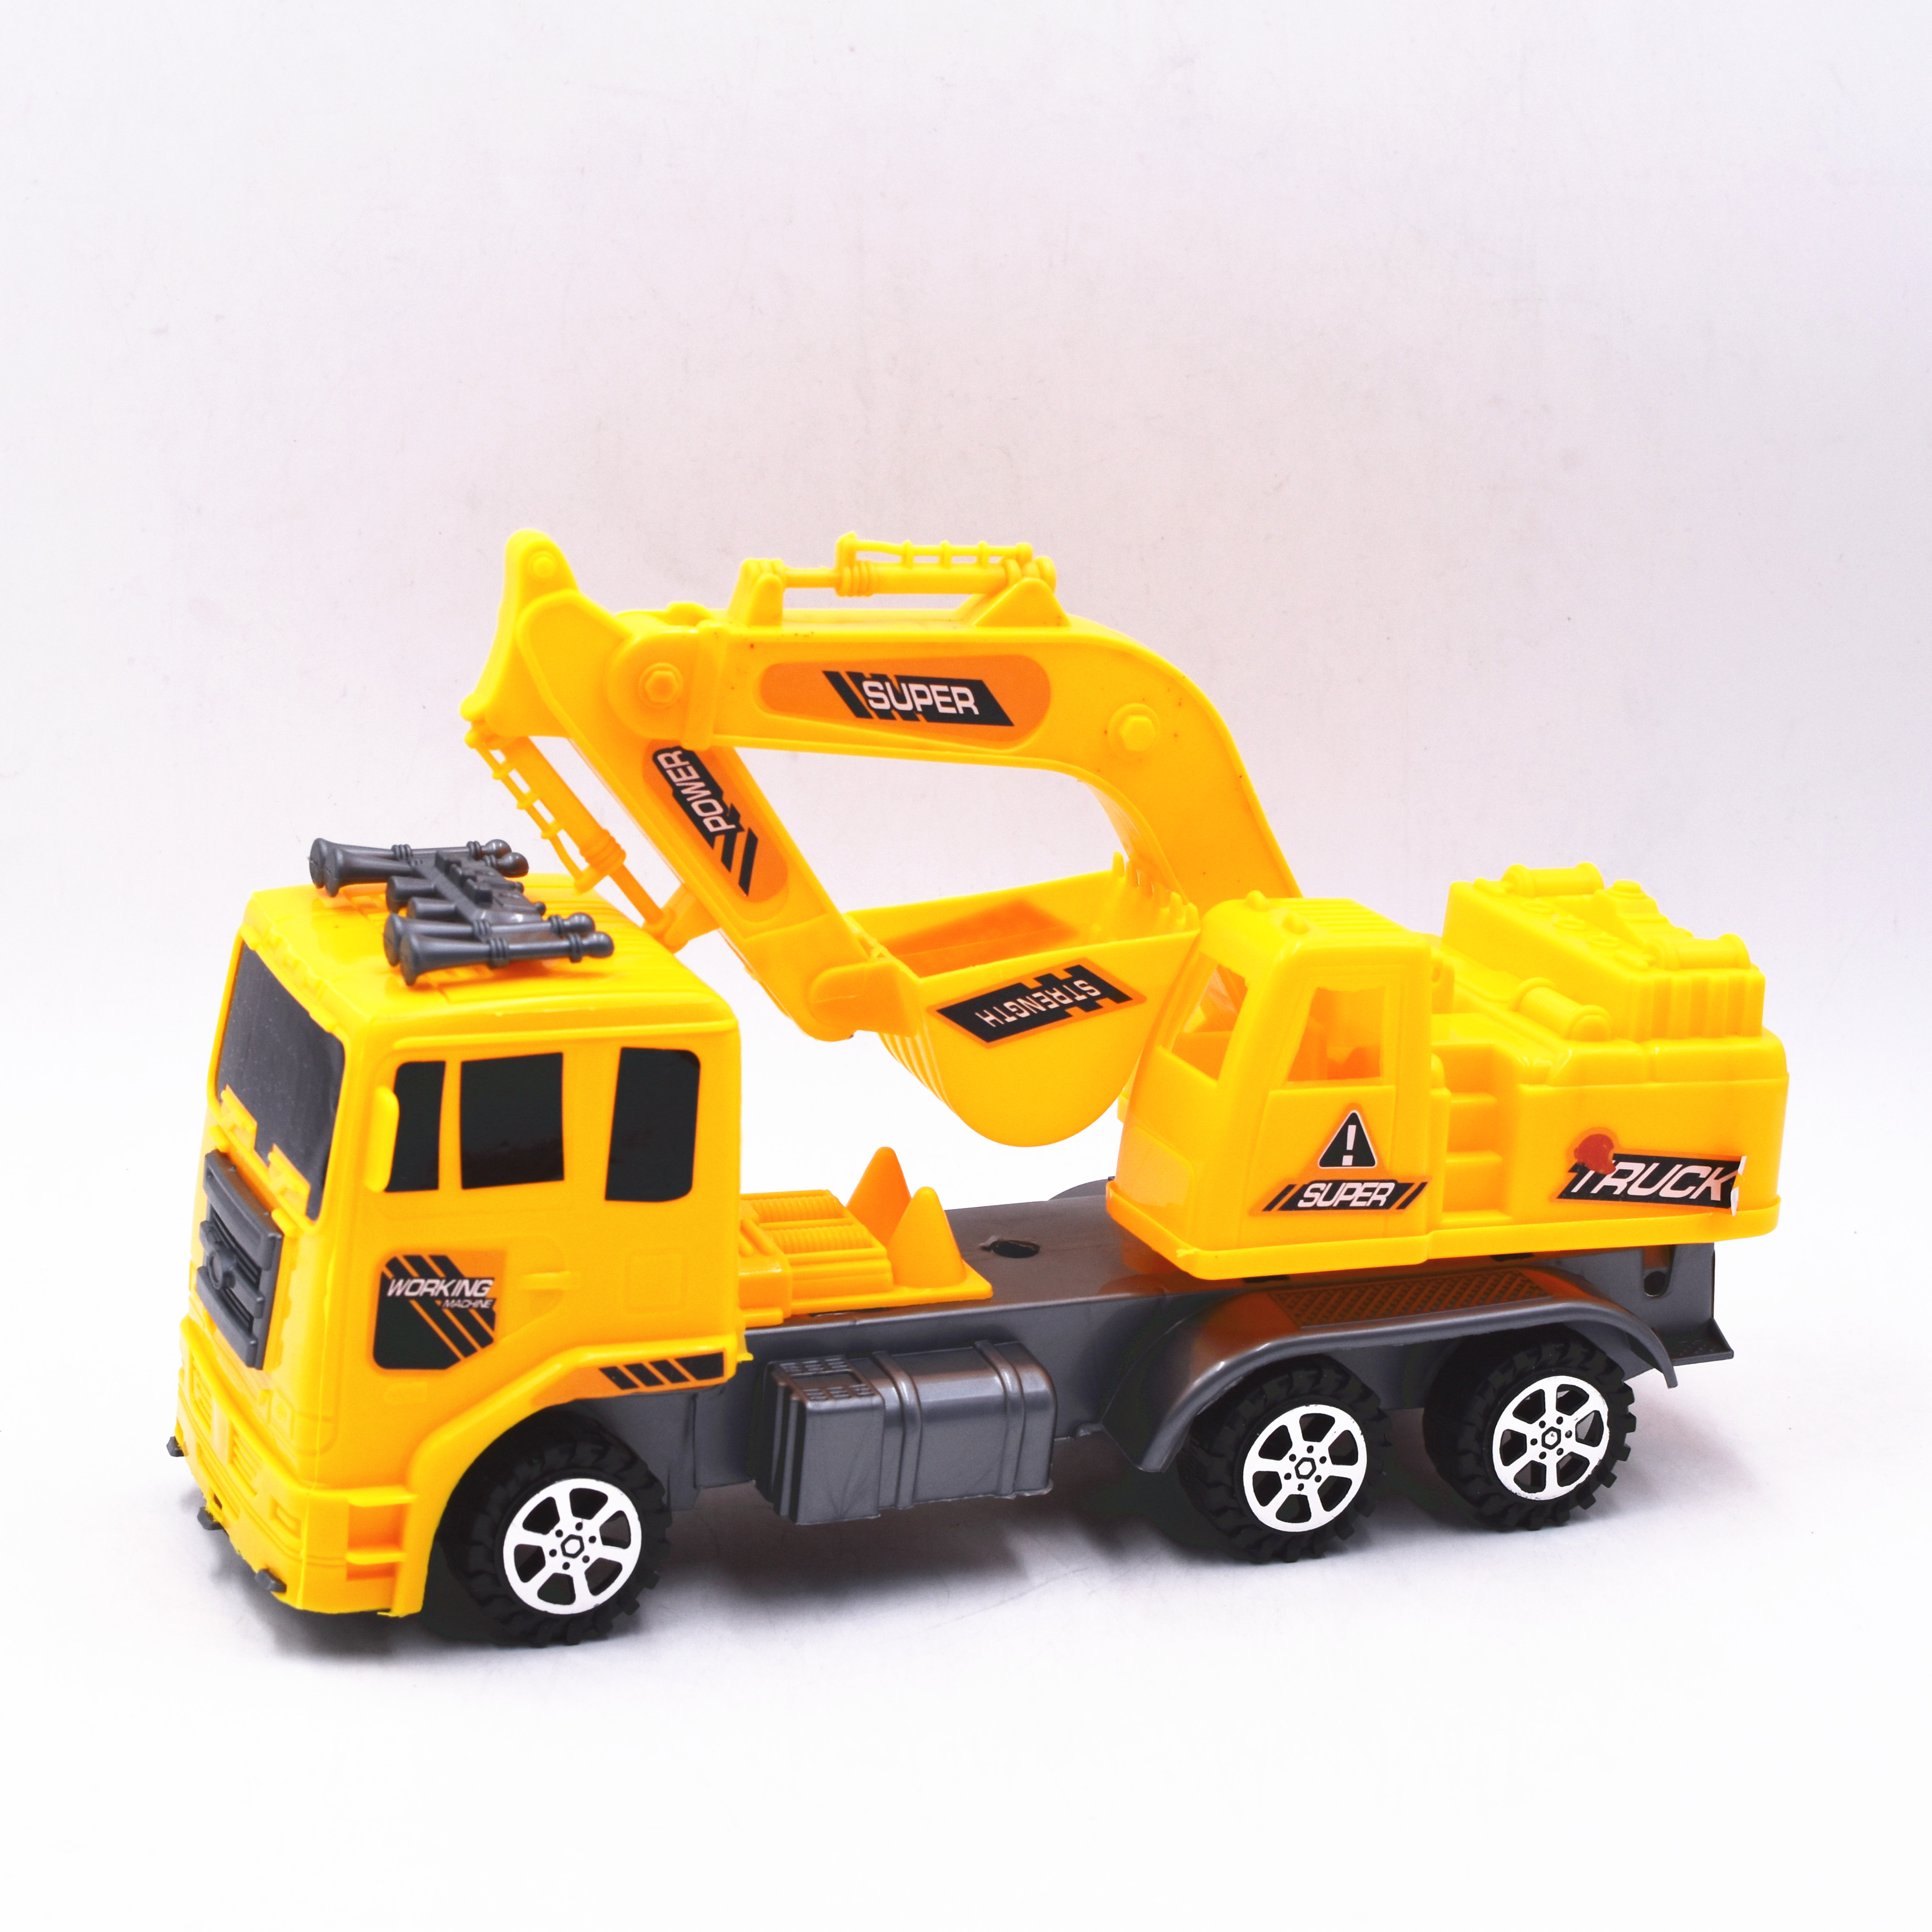 FREE WHEEL TRUCK TOY LY1759